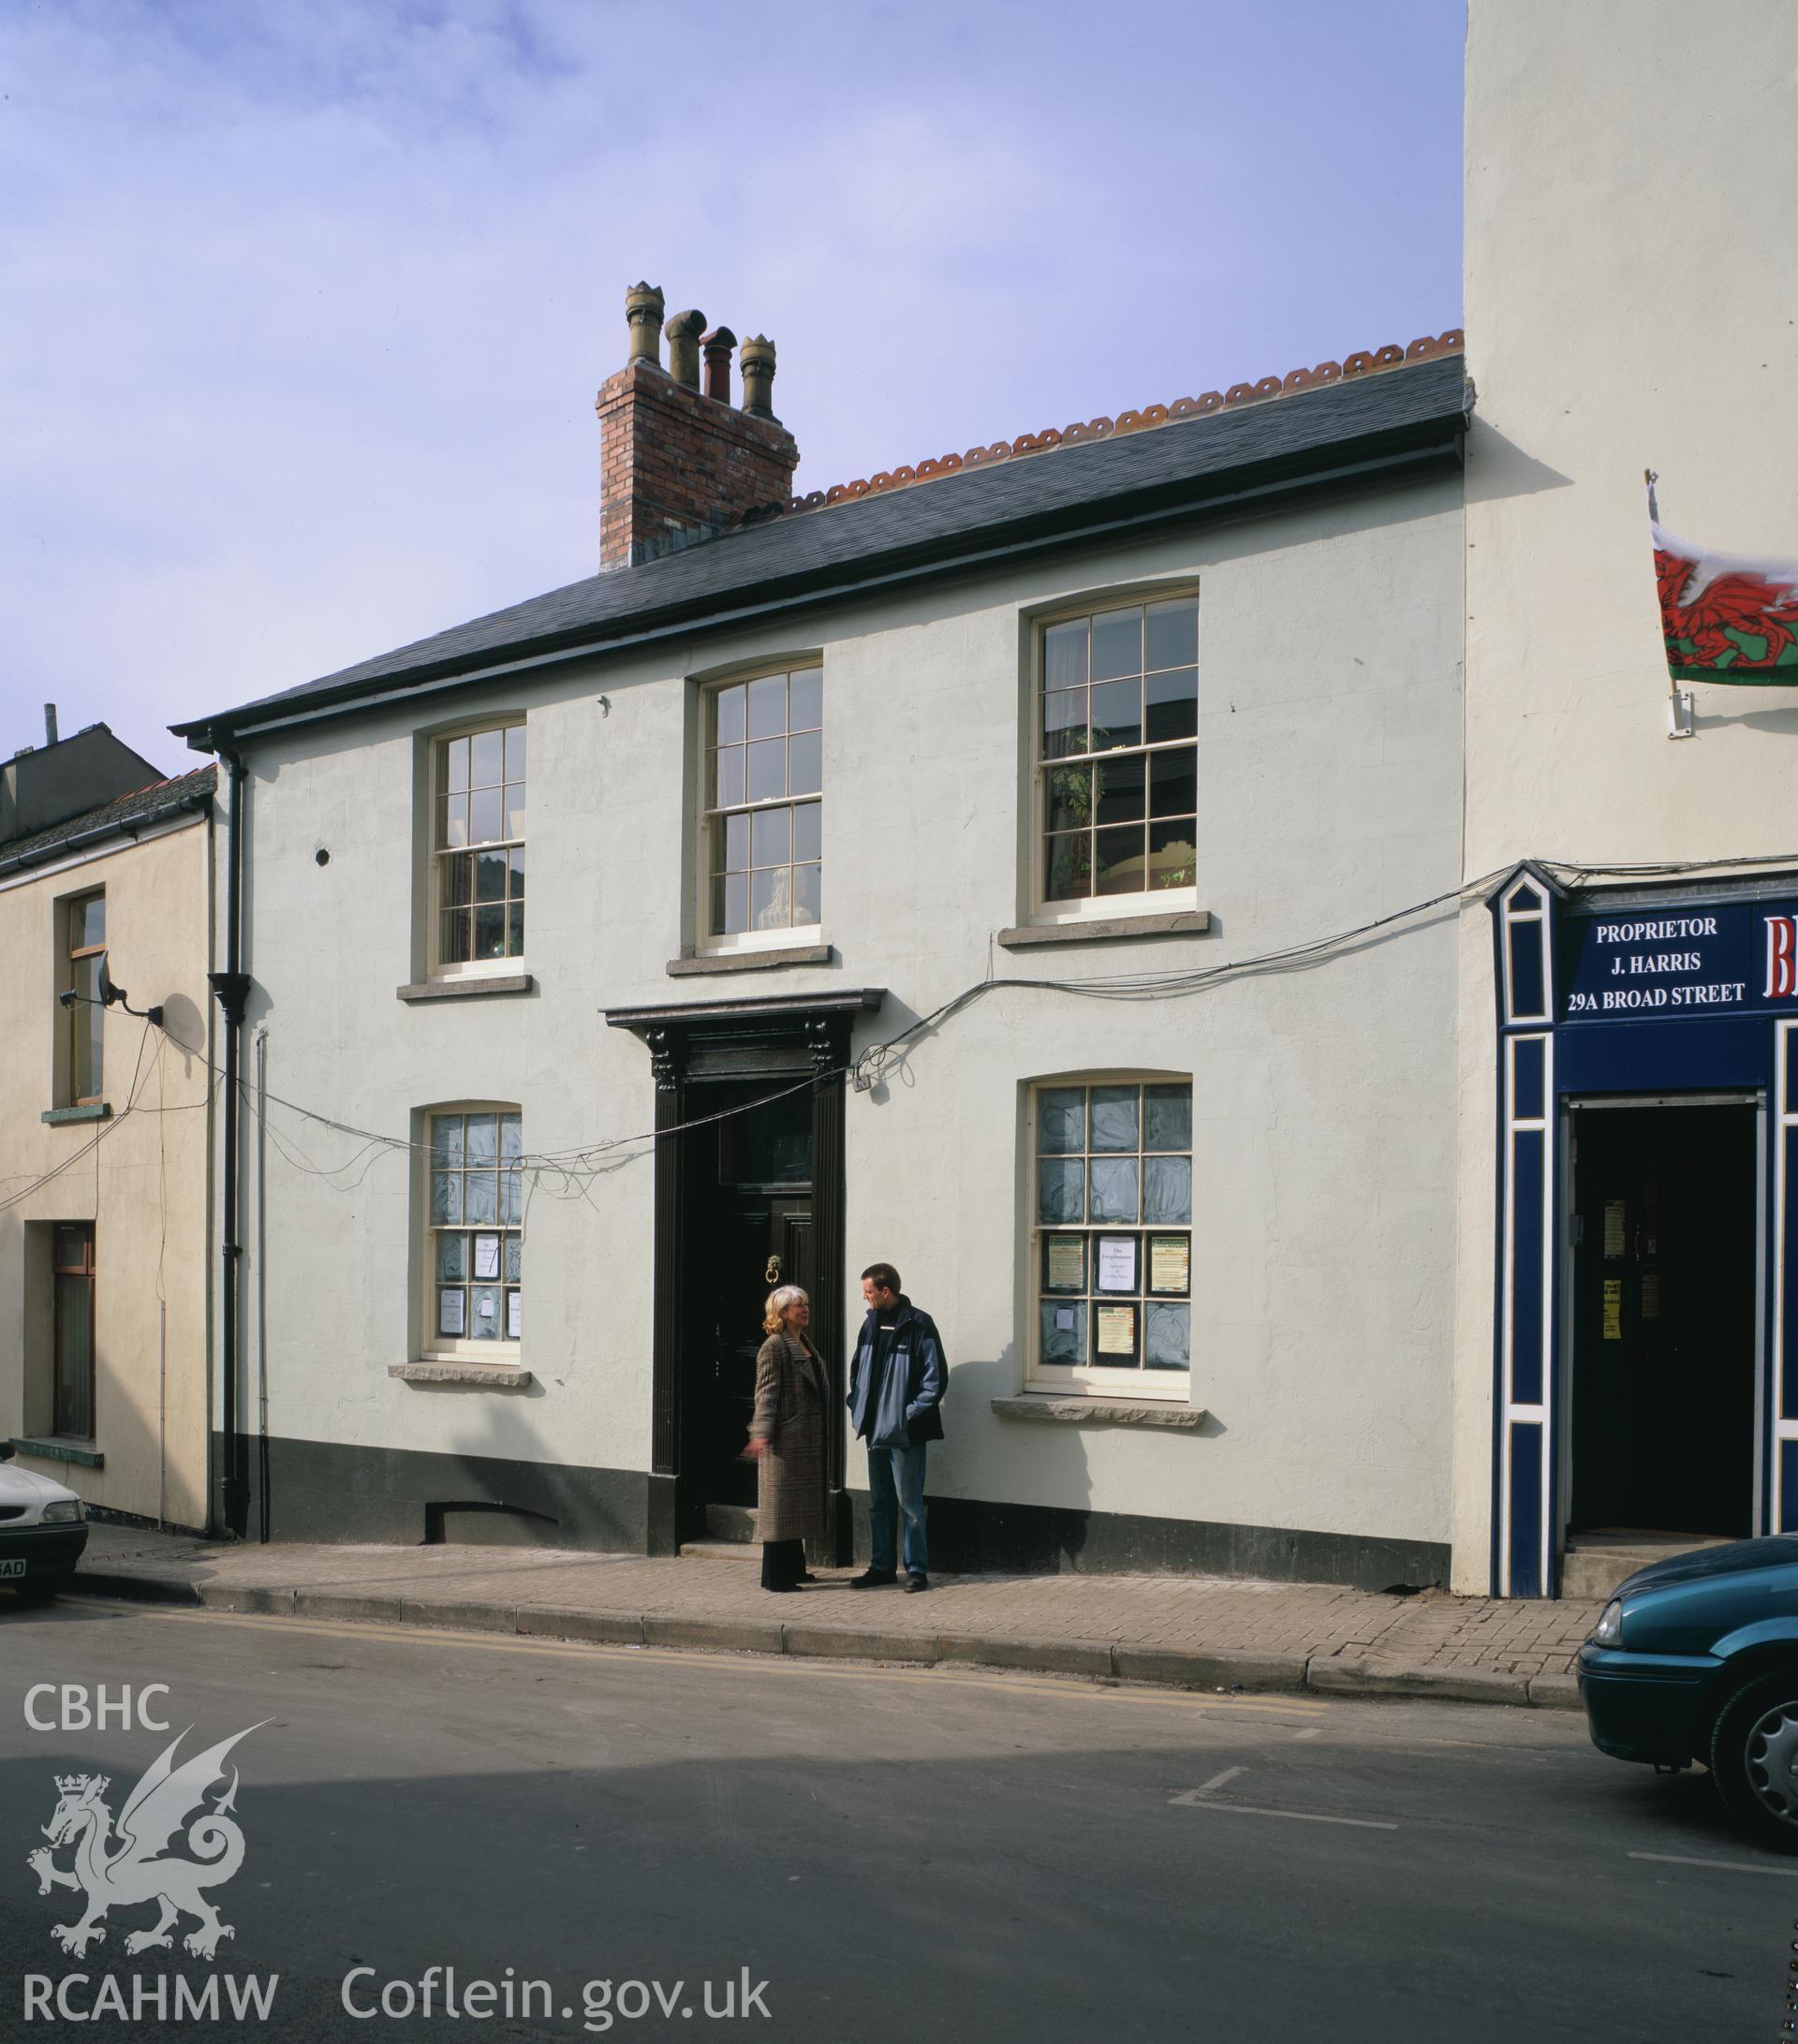 RCAHMW colour transparency showing exterior view of the Forge and Hammer Public House, Broad Street, Blaenavon.